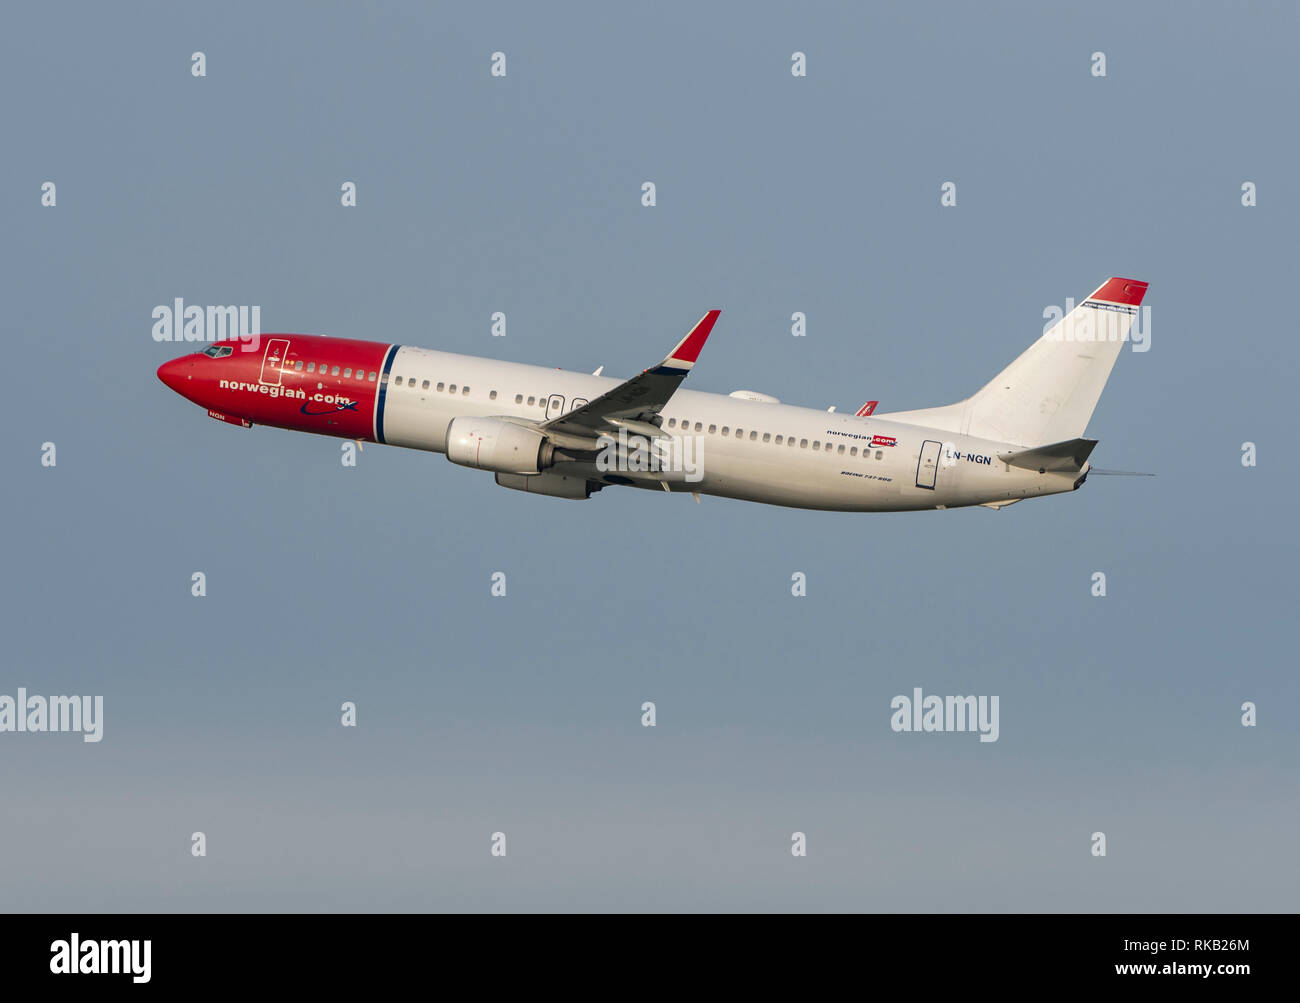 Norwegian Air Shuttle, Boeing 737-8JP, LN-NGN, takes off from Manchester Airport Stock Photo